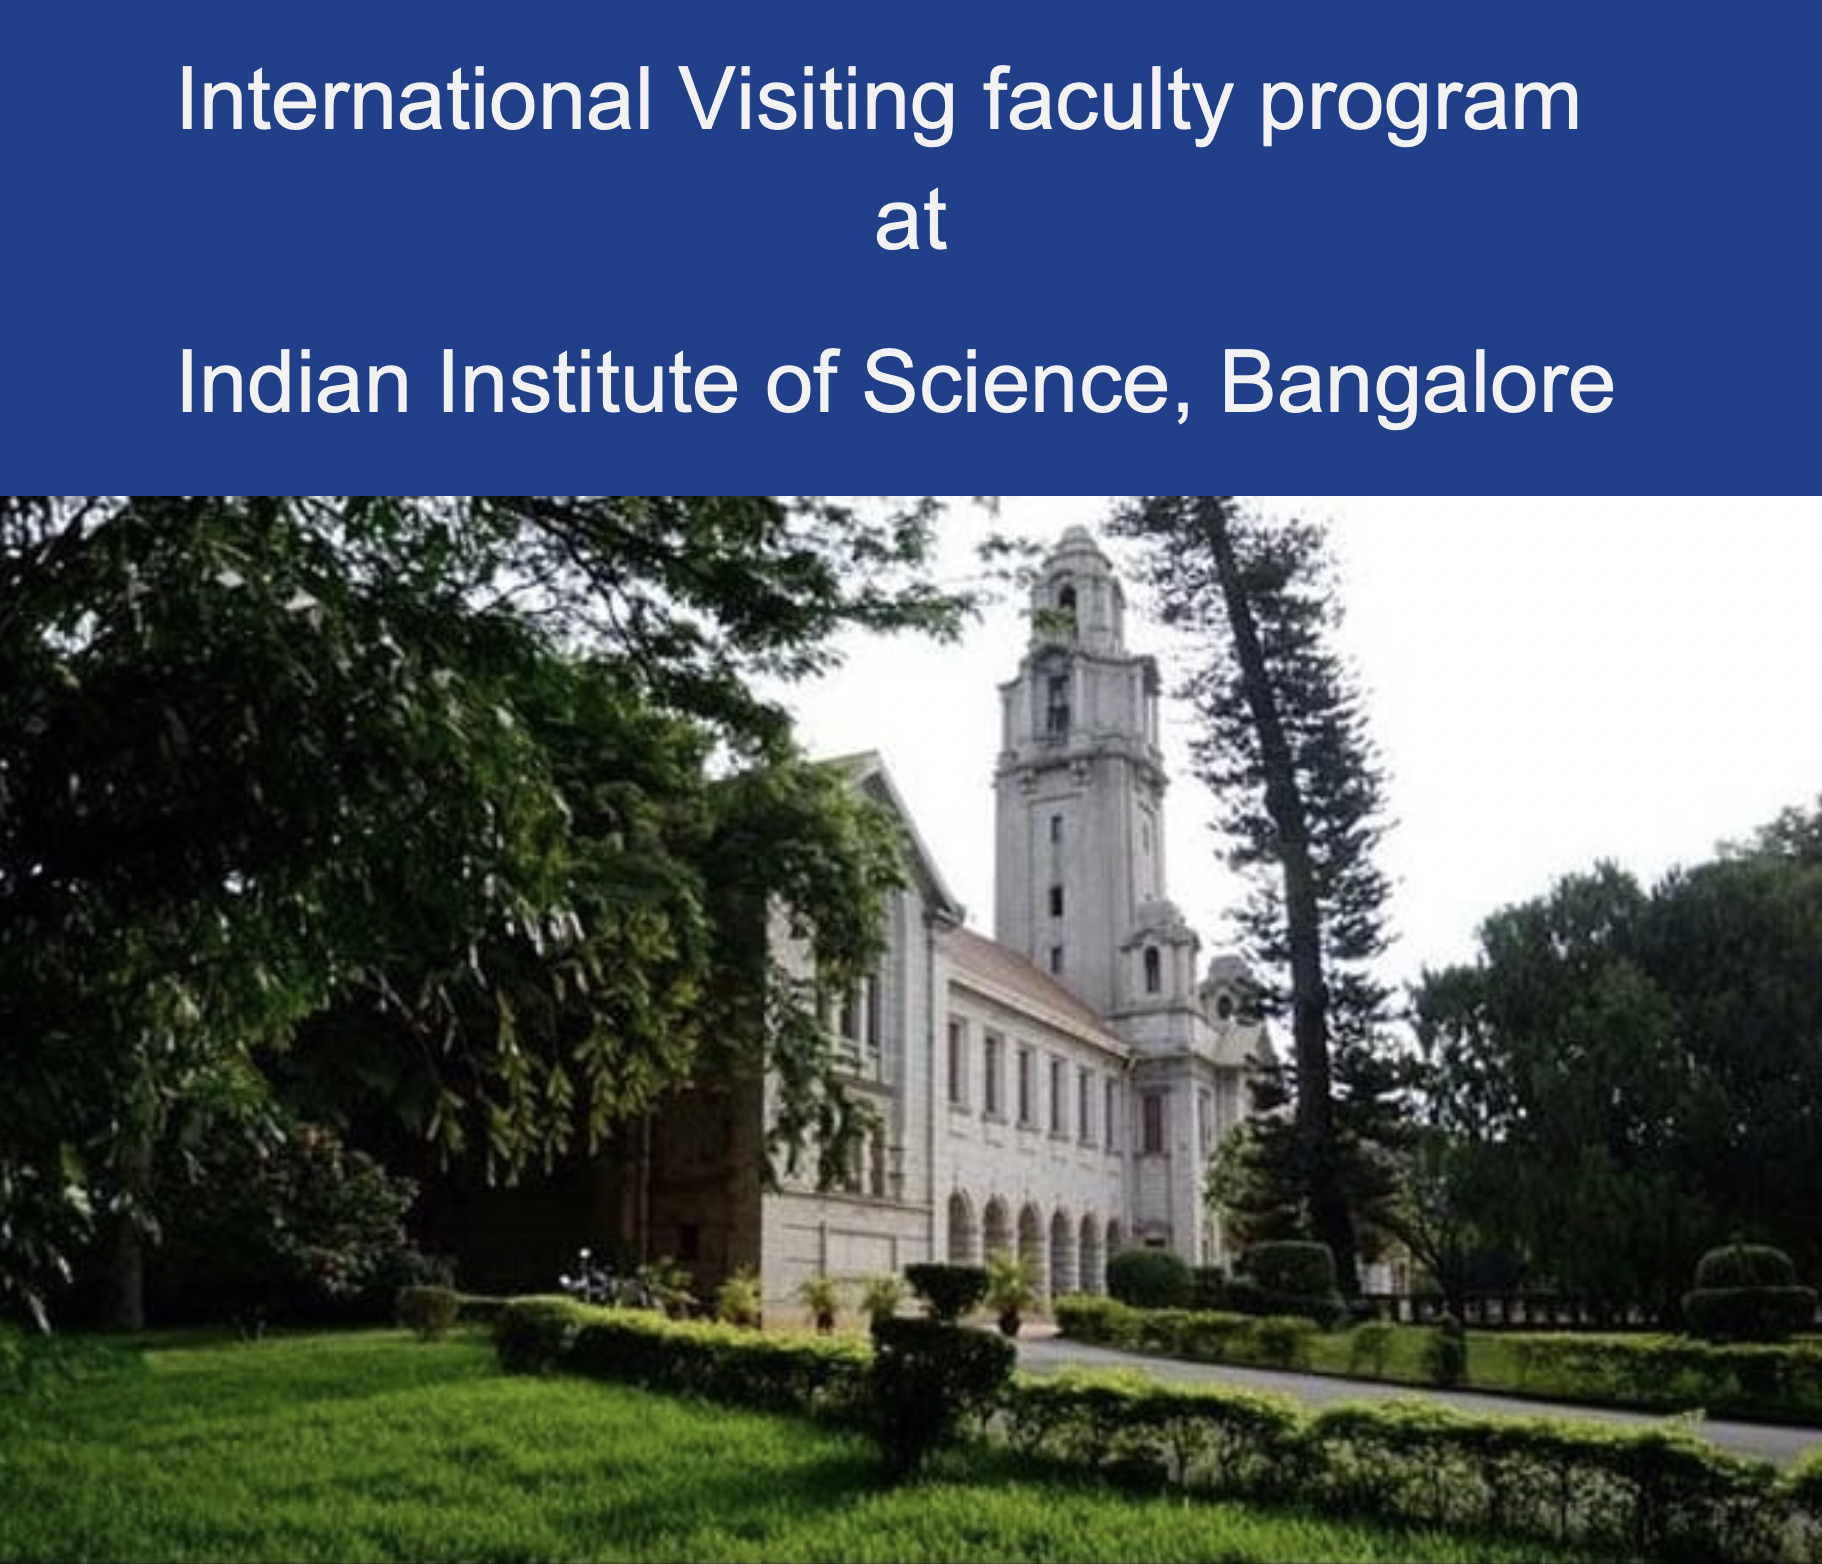 International Visiting Faculty Program welcomes HUST faculty members at various levels for short-term visiting program in IISc, India